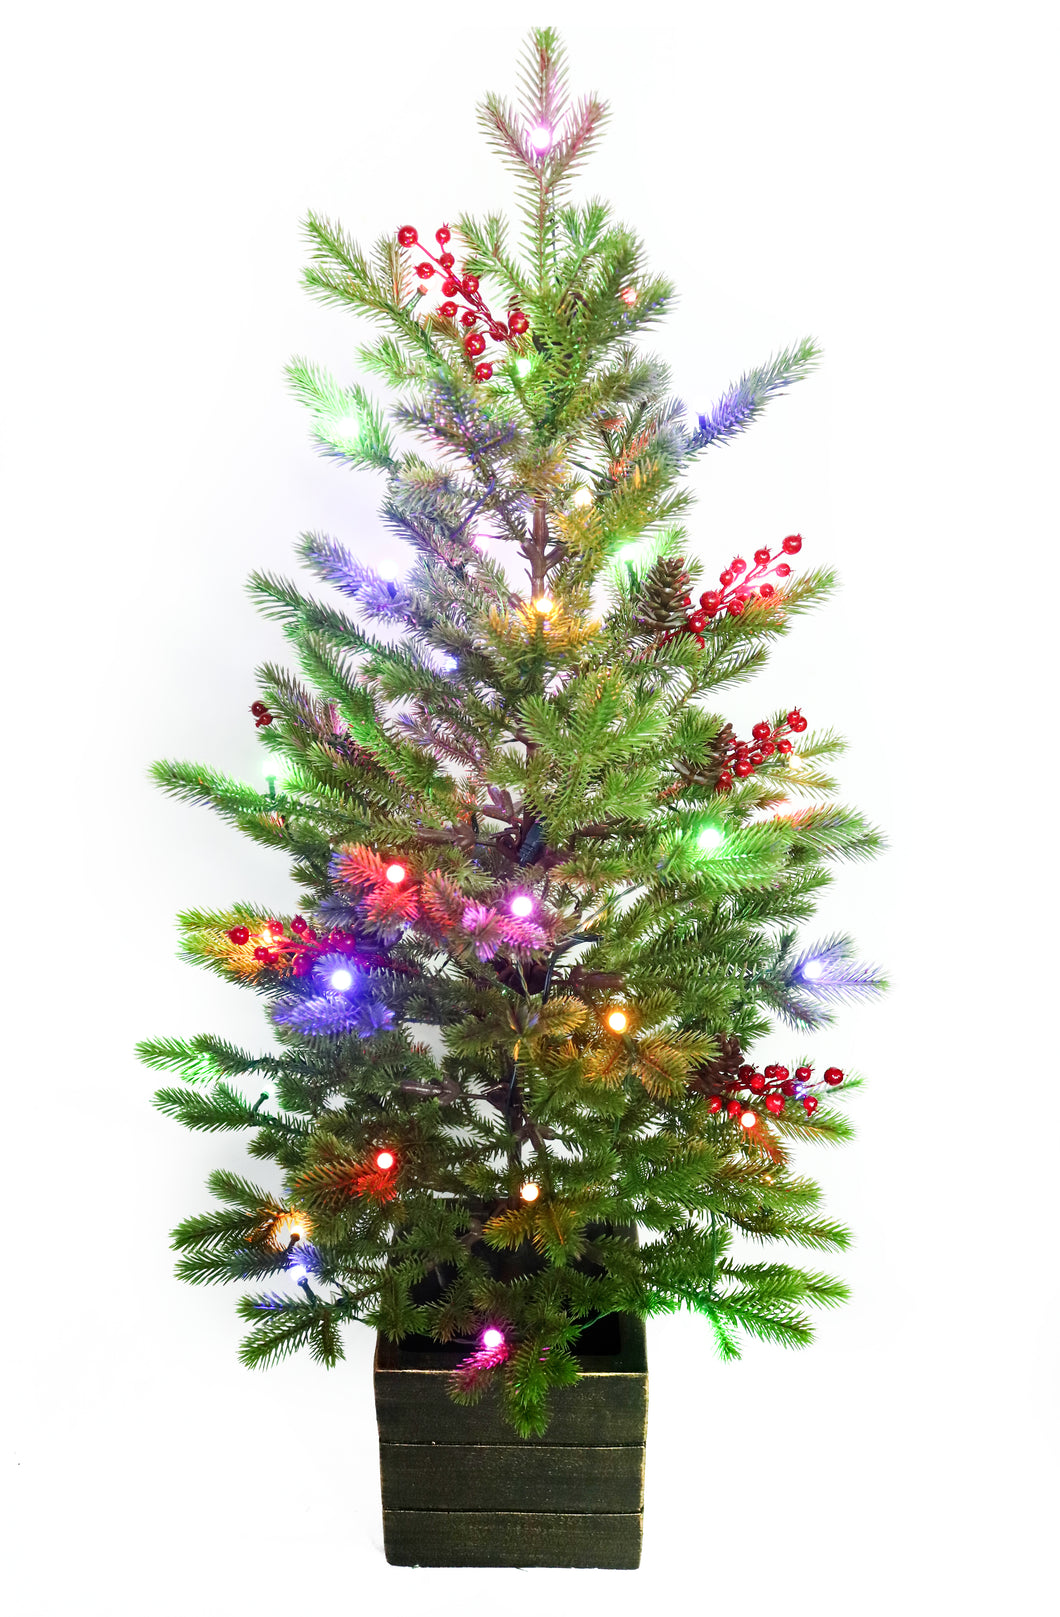 42” Potted Green Fraser Fir Christmas Tree